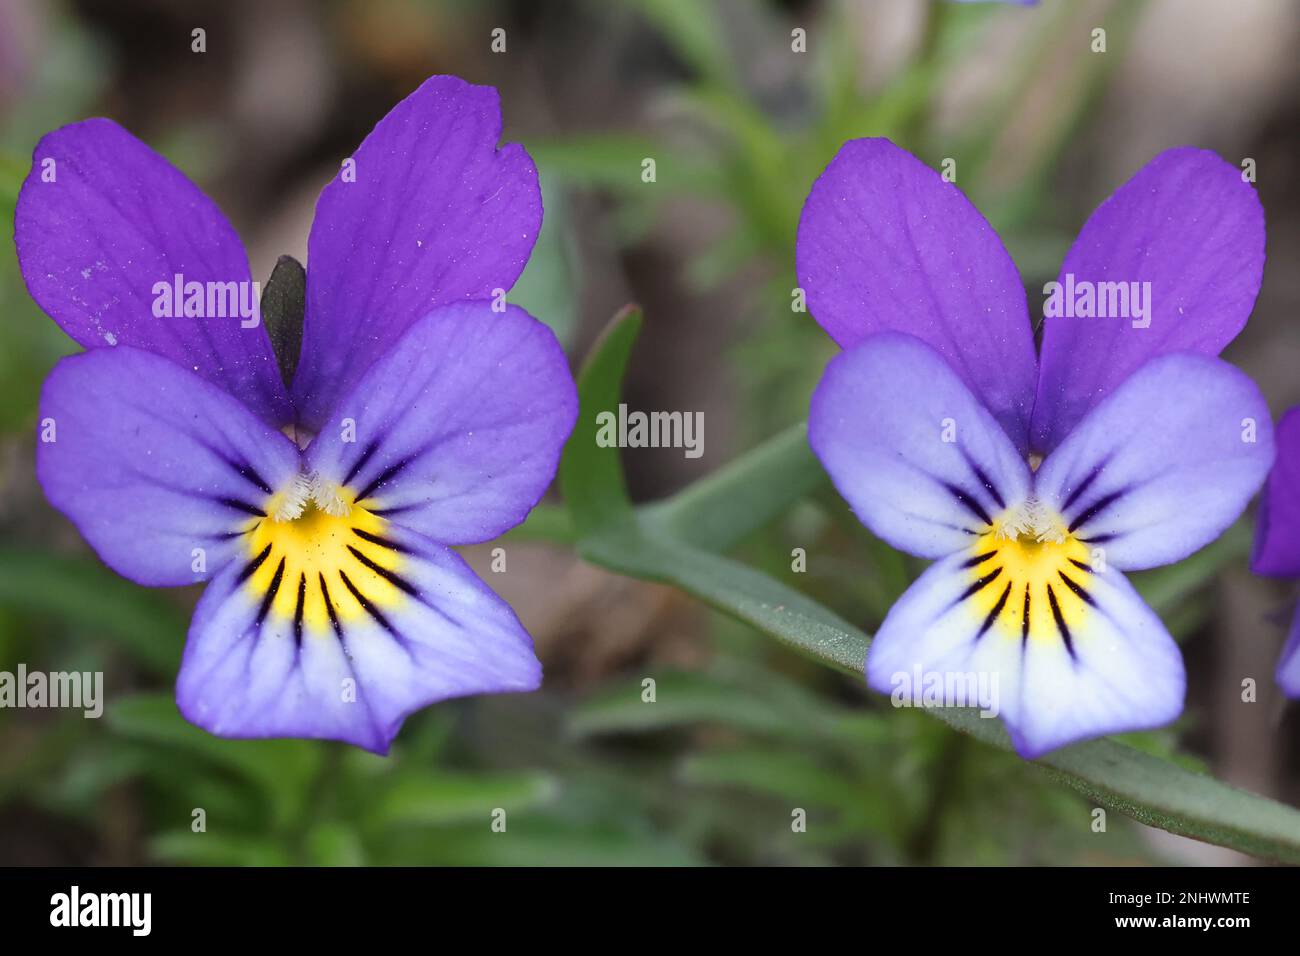 Viola tricolor, known as Johnny Jump up, heartsease, heart's delight and many other names, wild flower from Finland Stock Photo